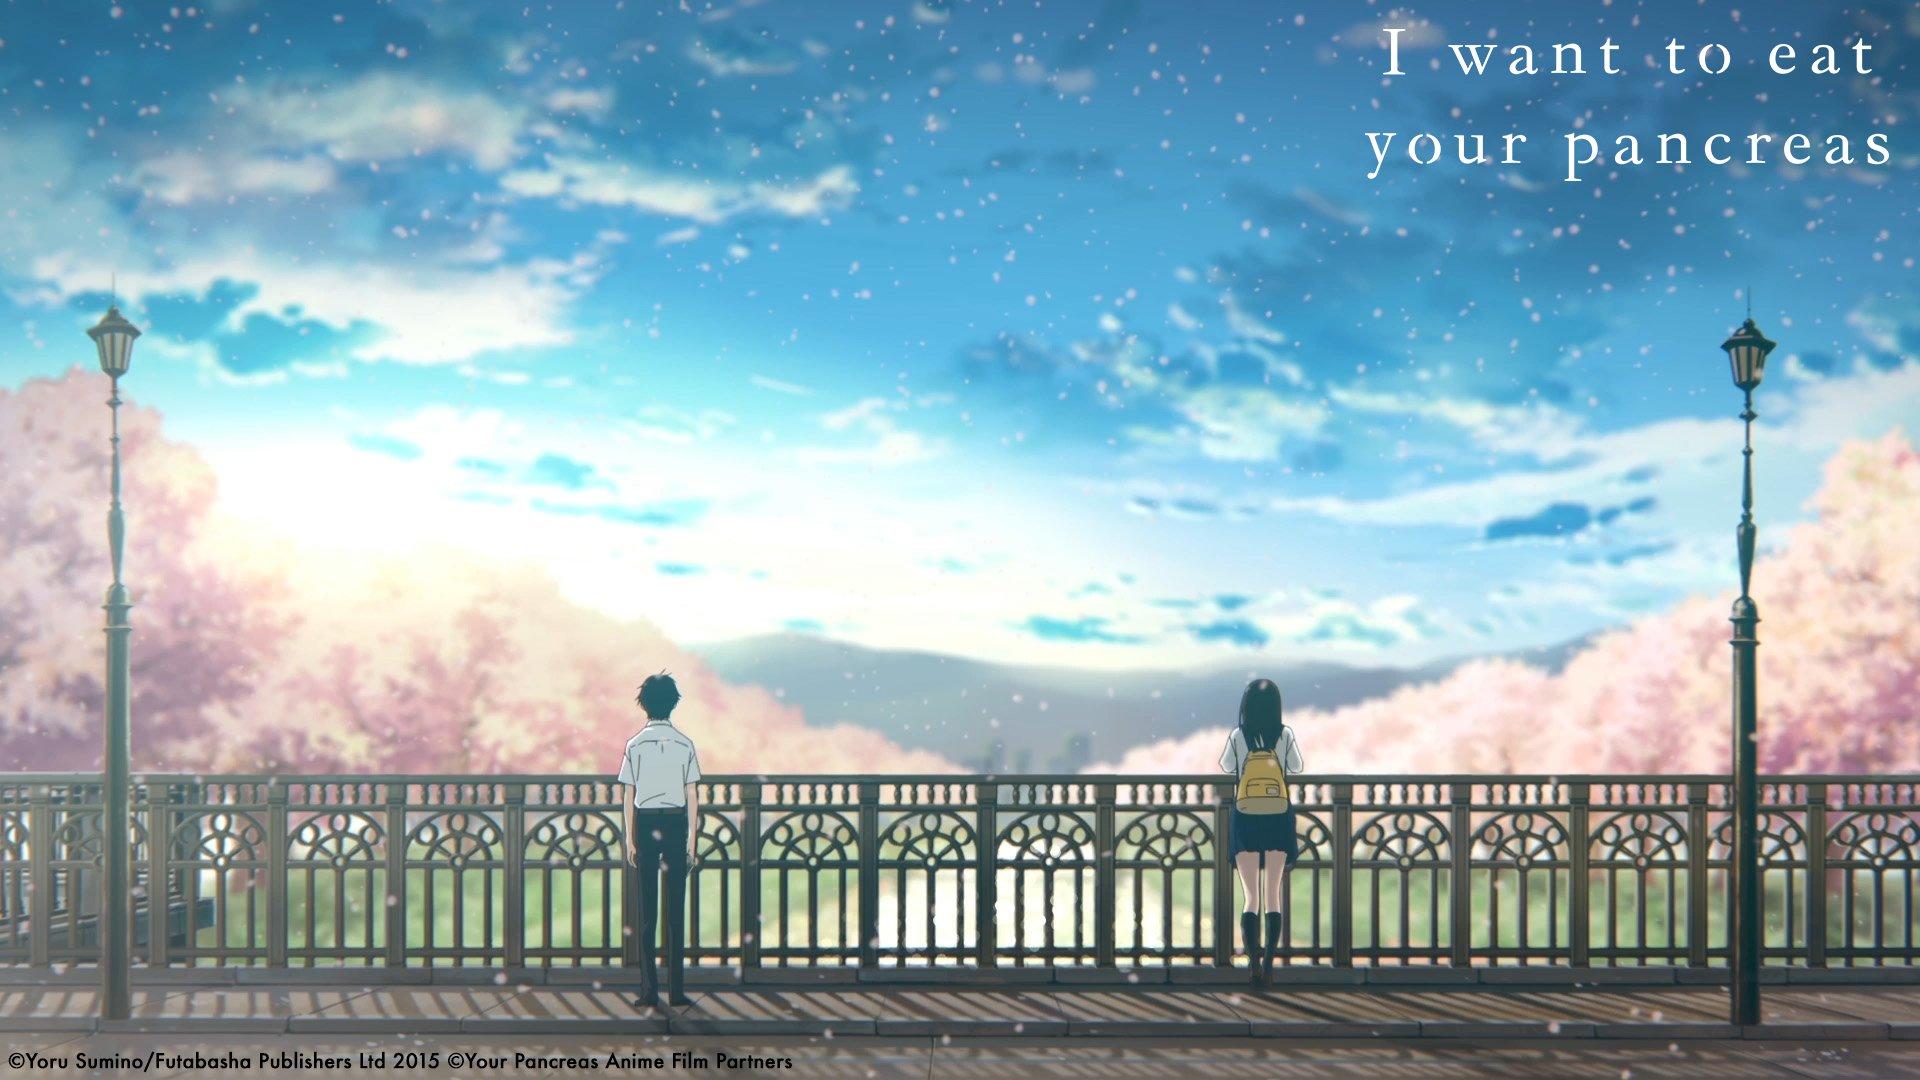 I Want To Eat Your Pancreas Wallpaper For Ipad